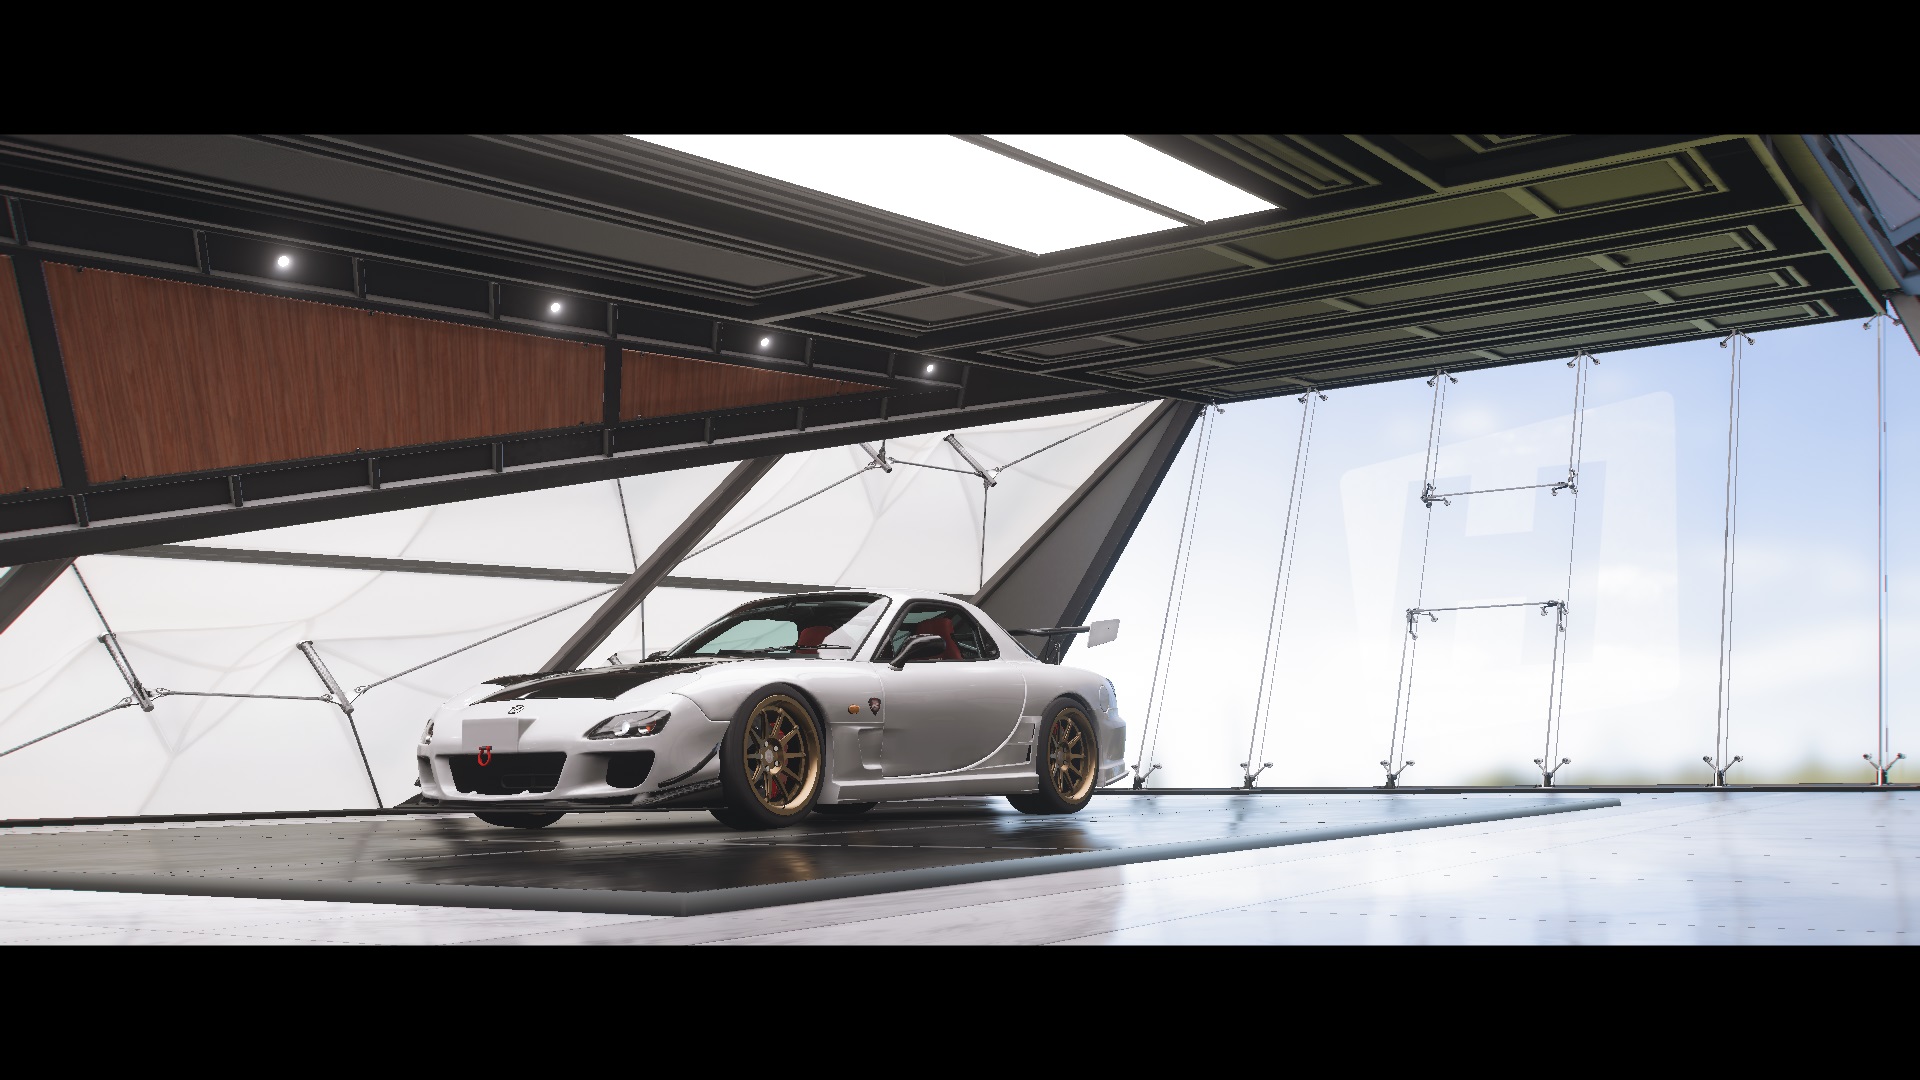 Forza Horizon 5: Place Within the Top 2% with this Mazda RX-7 Tune